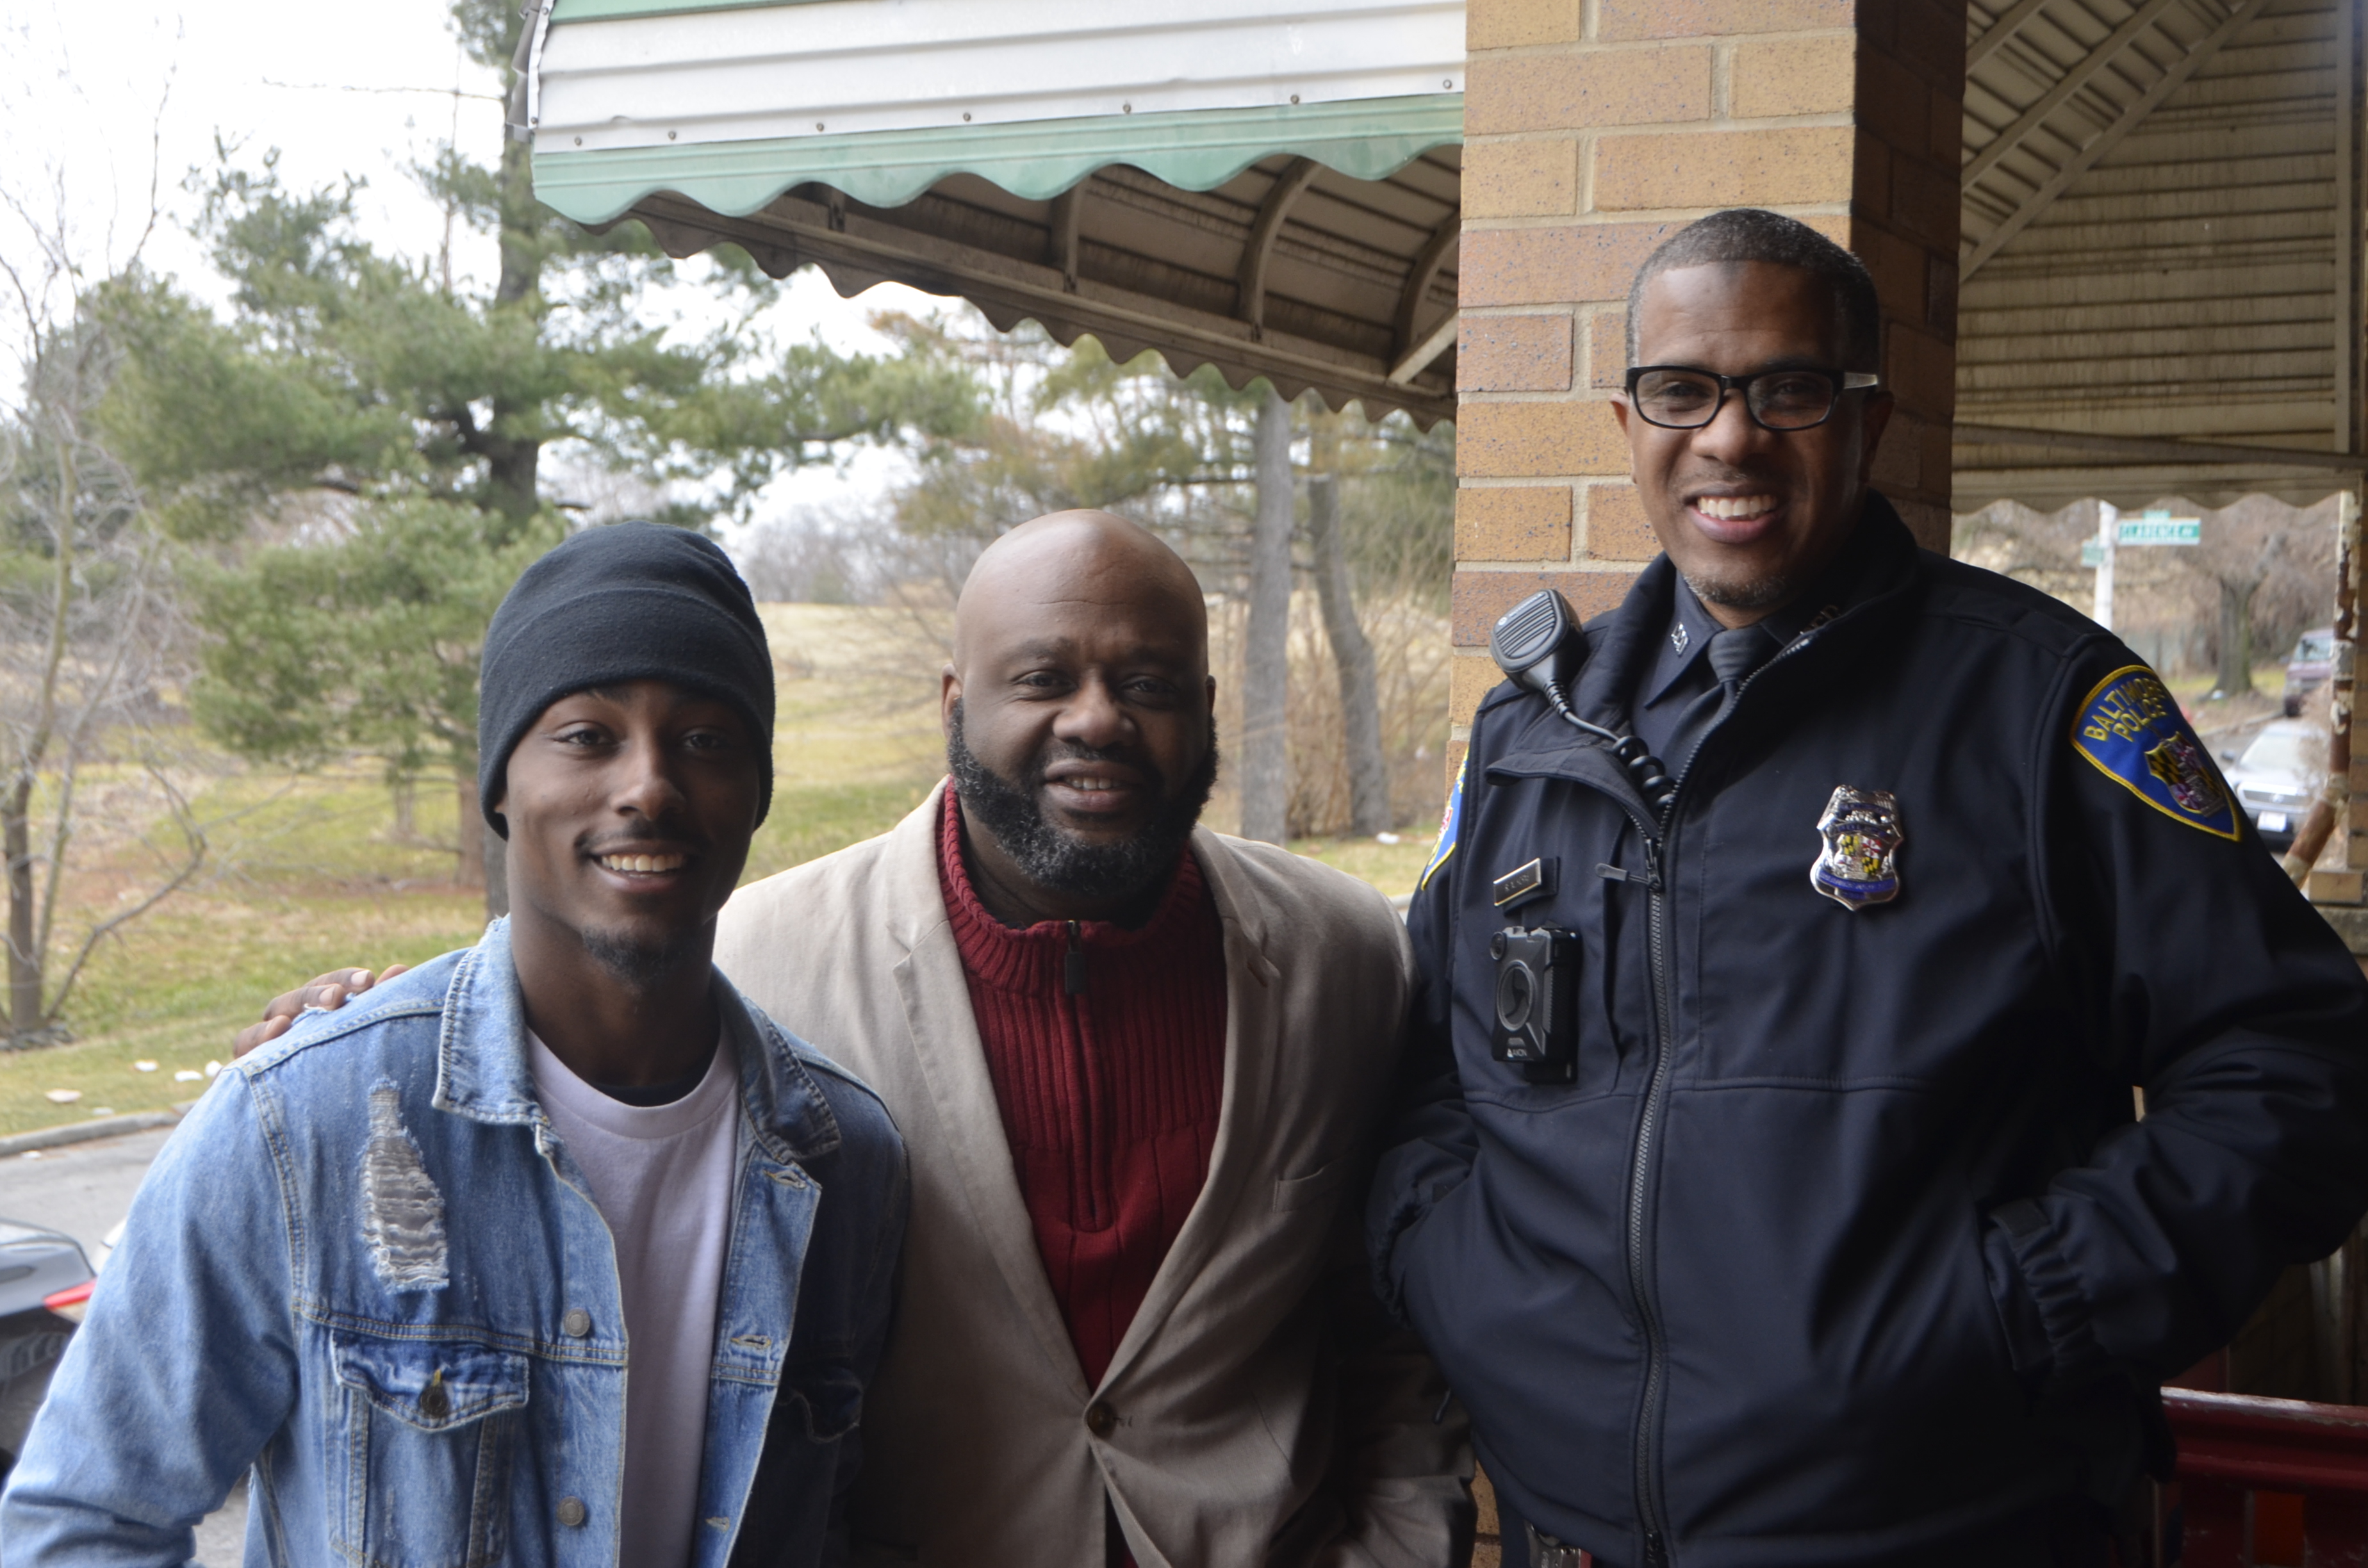 AMC In-Service Chaplain & Imam Training examines community policing in Baltimore City